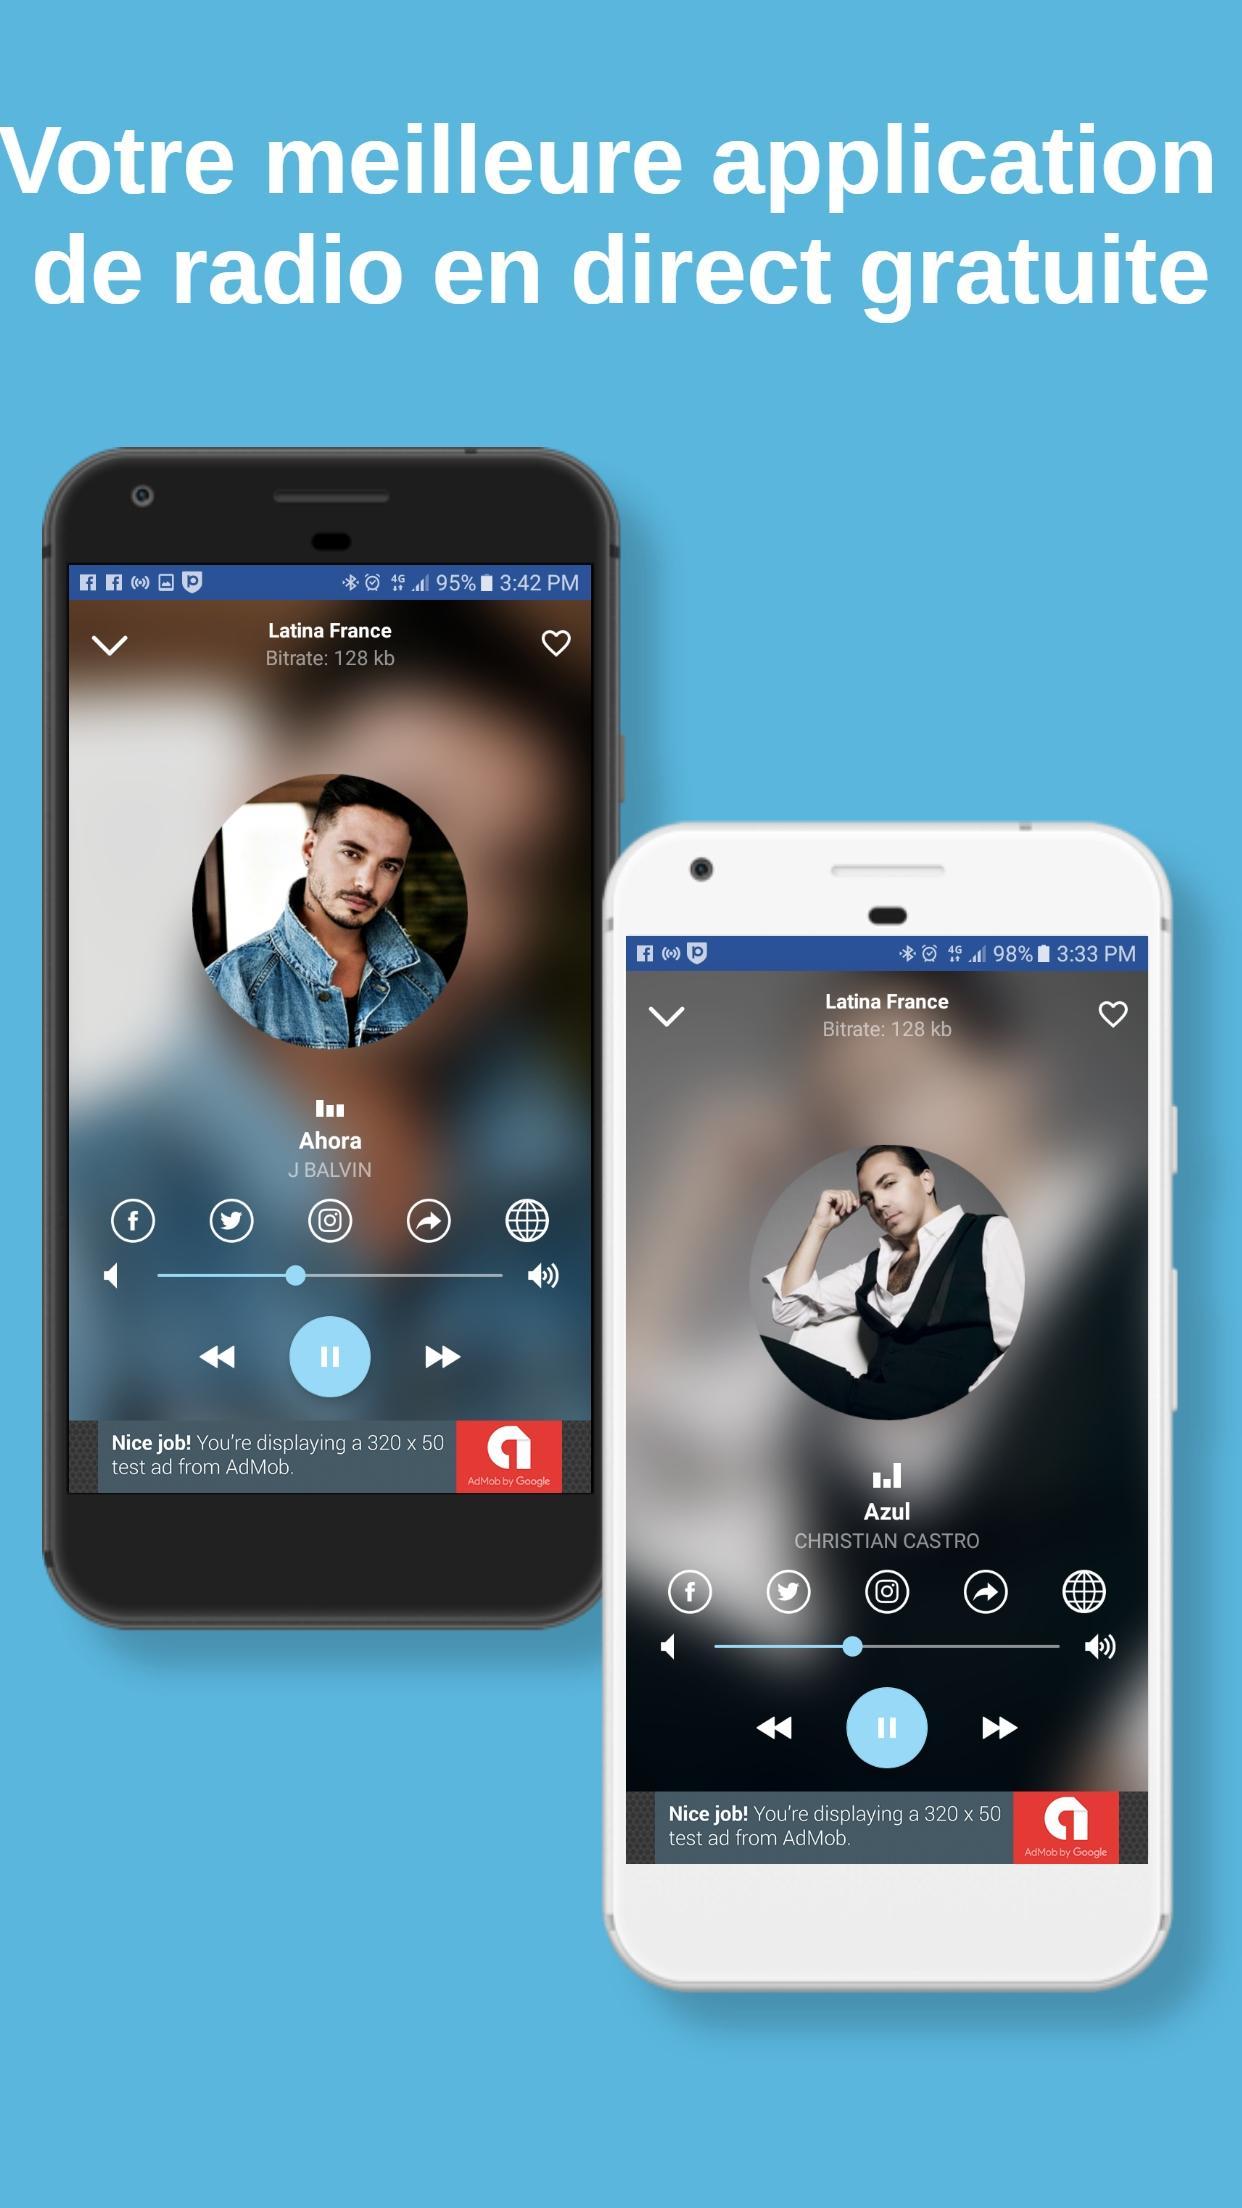 Free Latina Radio France for Android - APK Download